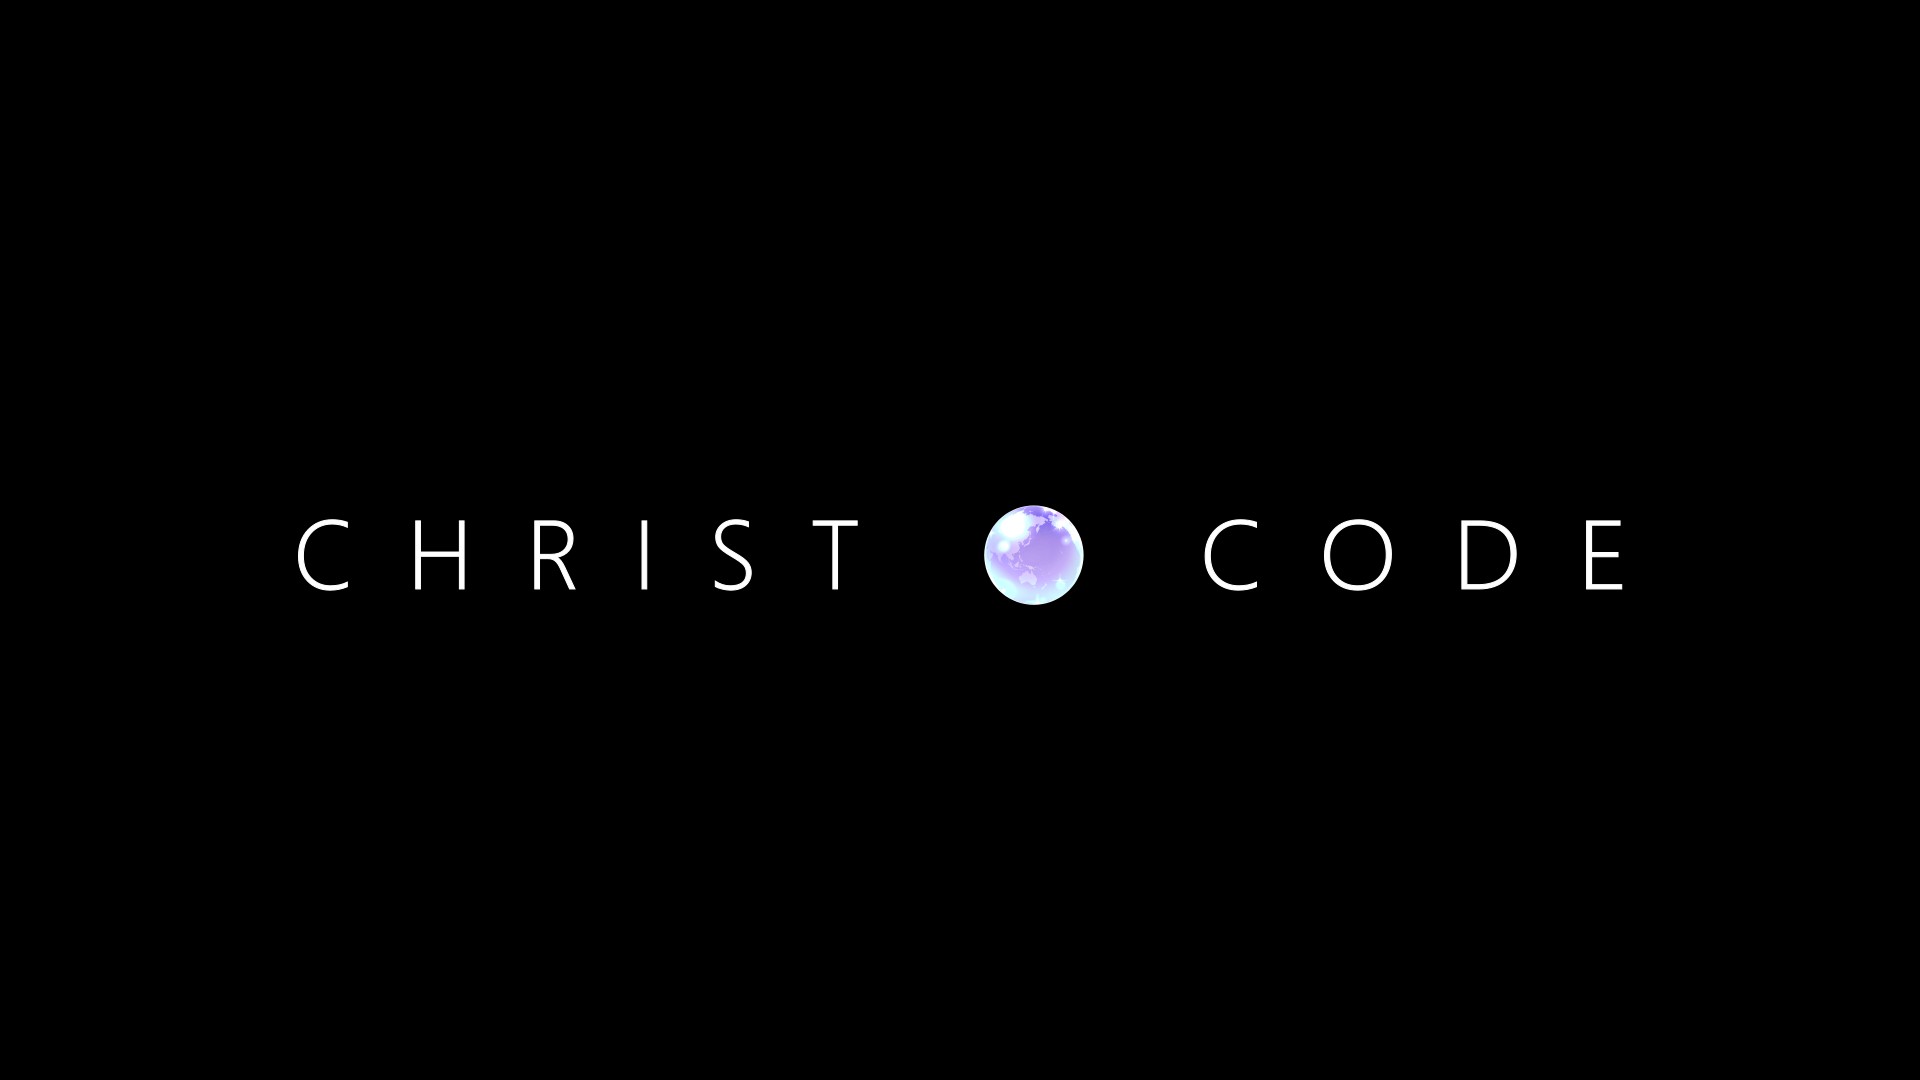 News from CHRIST・CODE